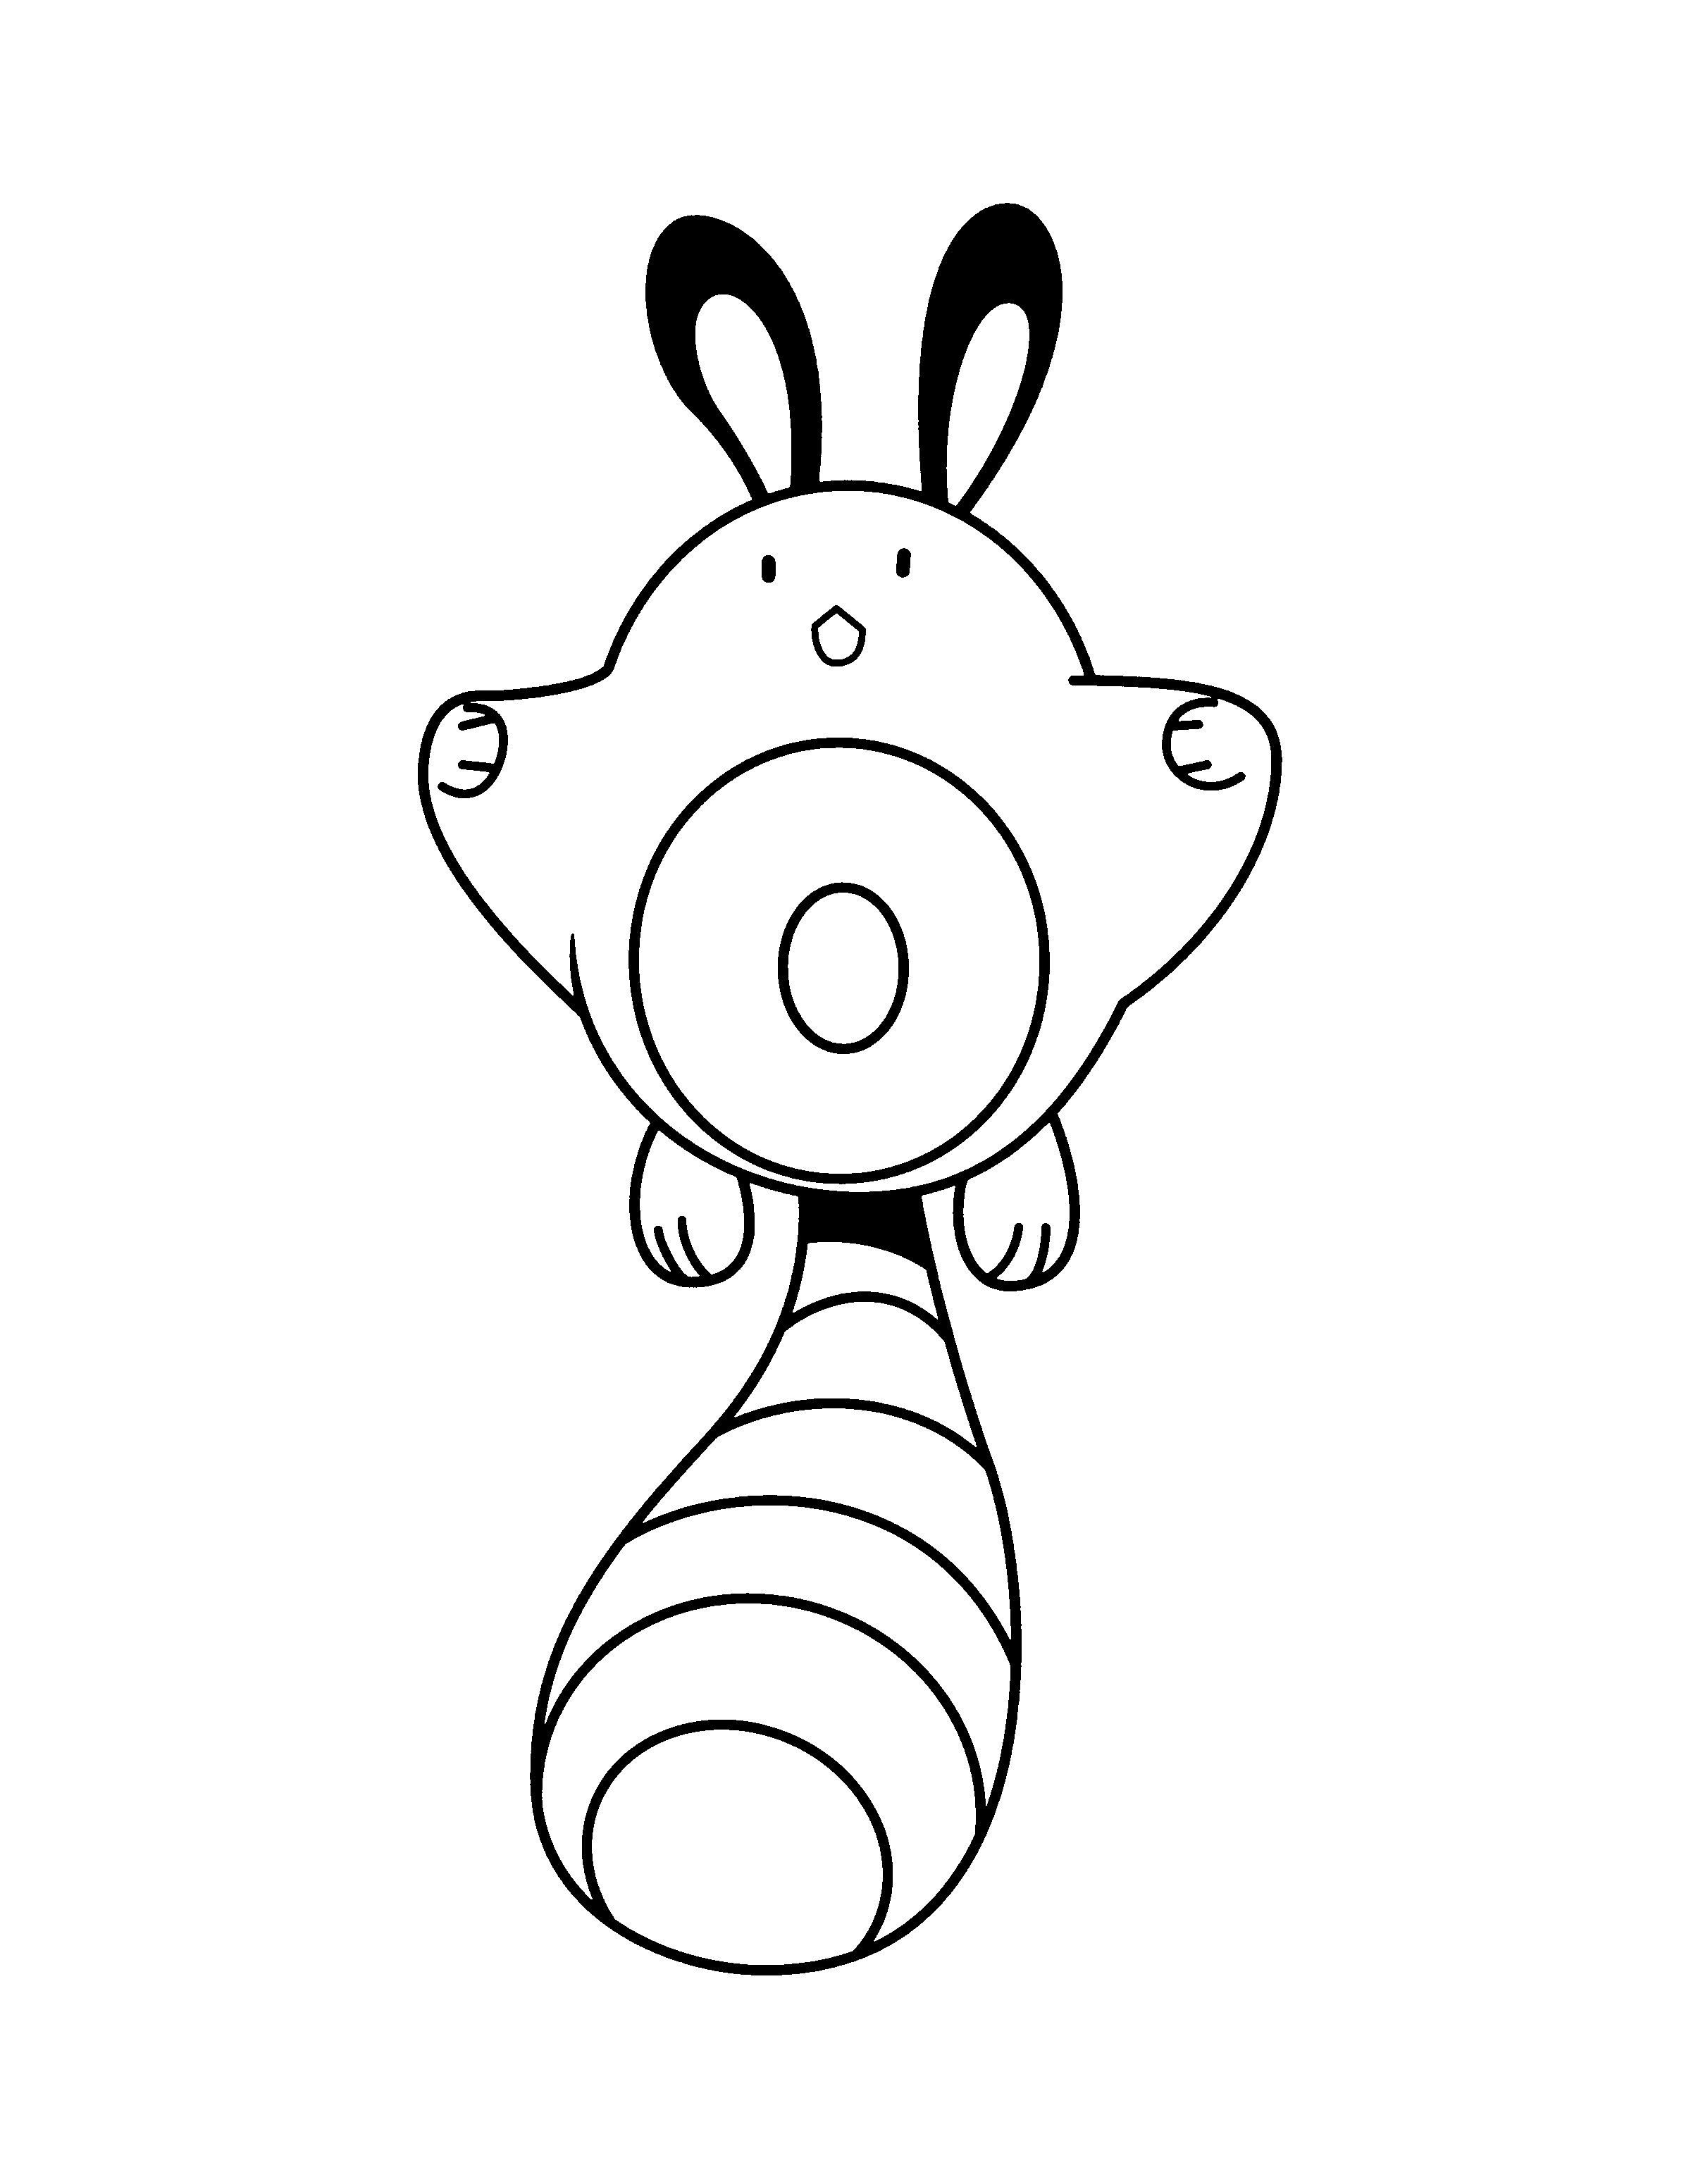 animated-coloring-pages-pokemon-image-0172